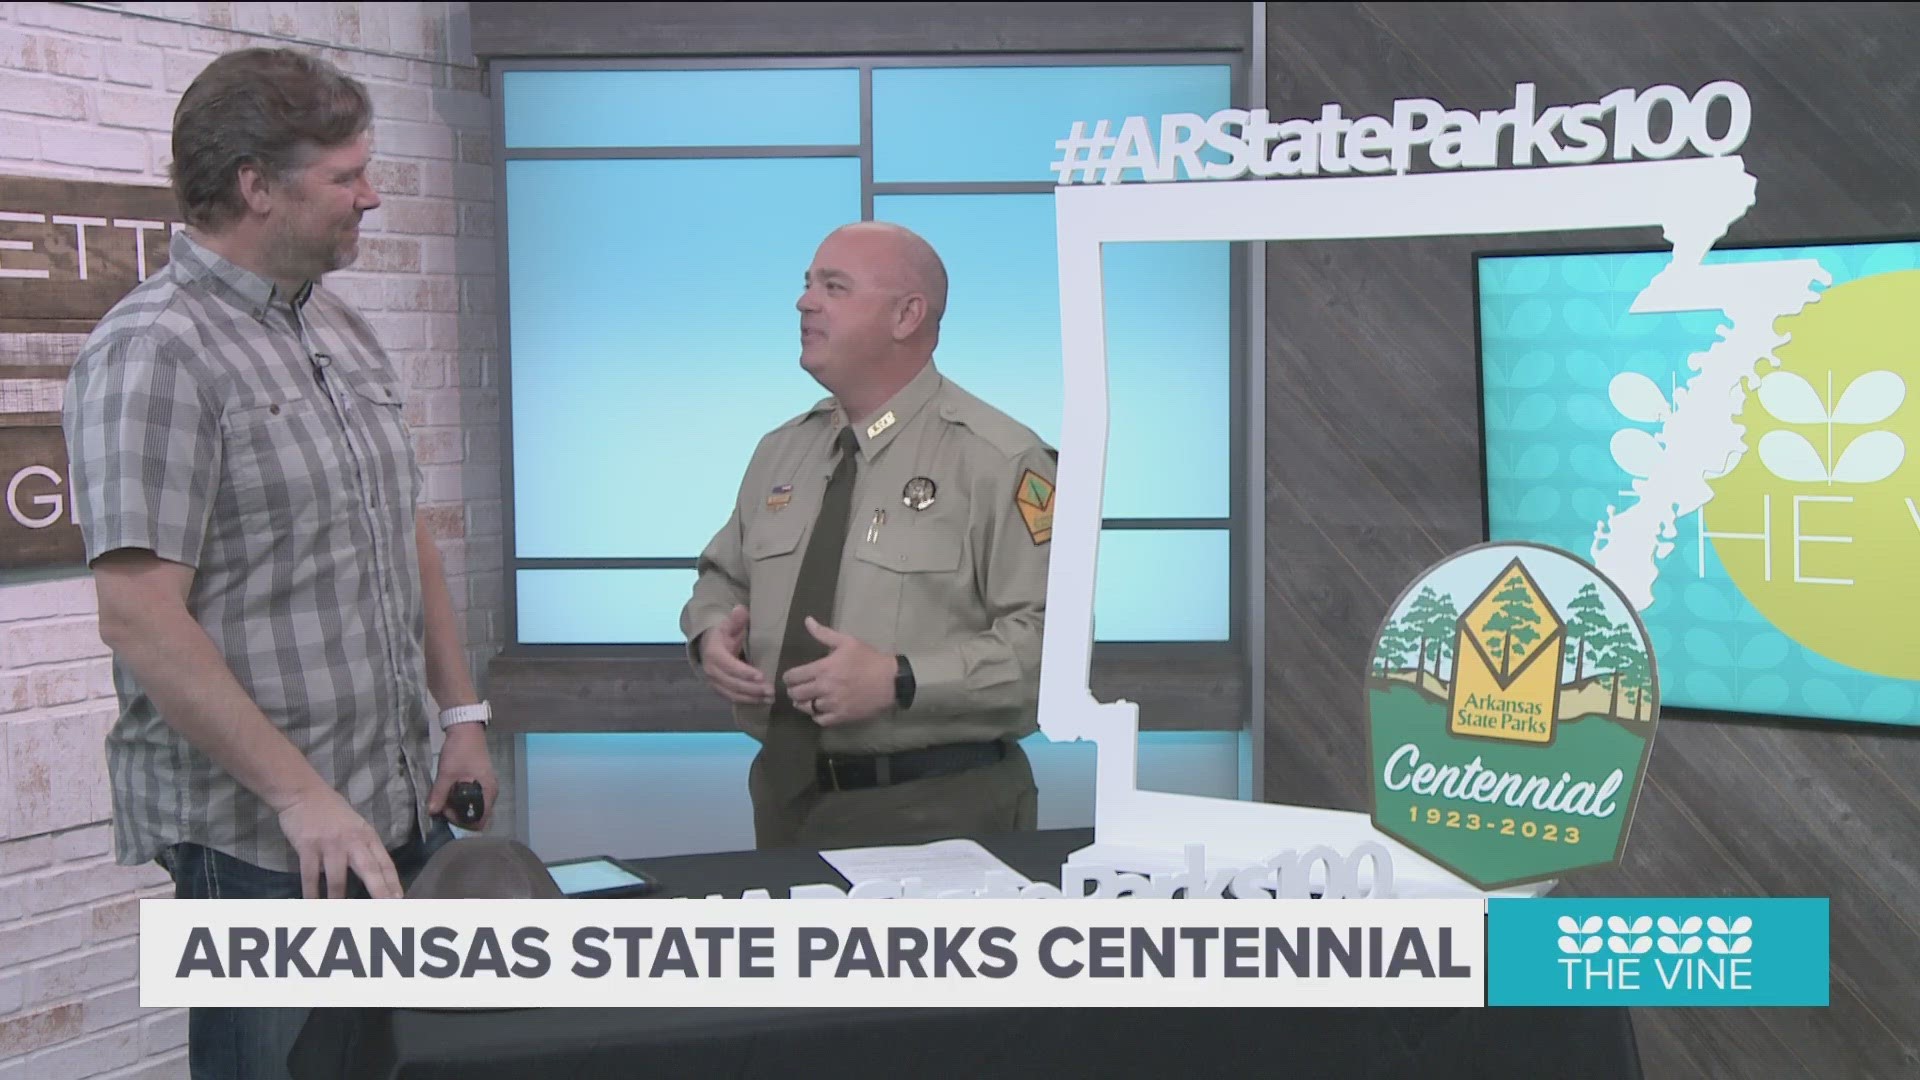 Shea Lewis, Arkansas State Parks Director, tells us how they are celebrating 100 years of state parks.